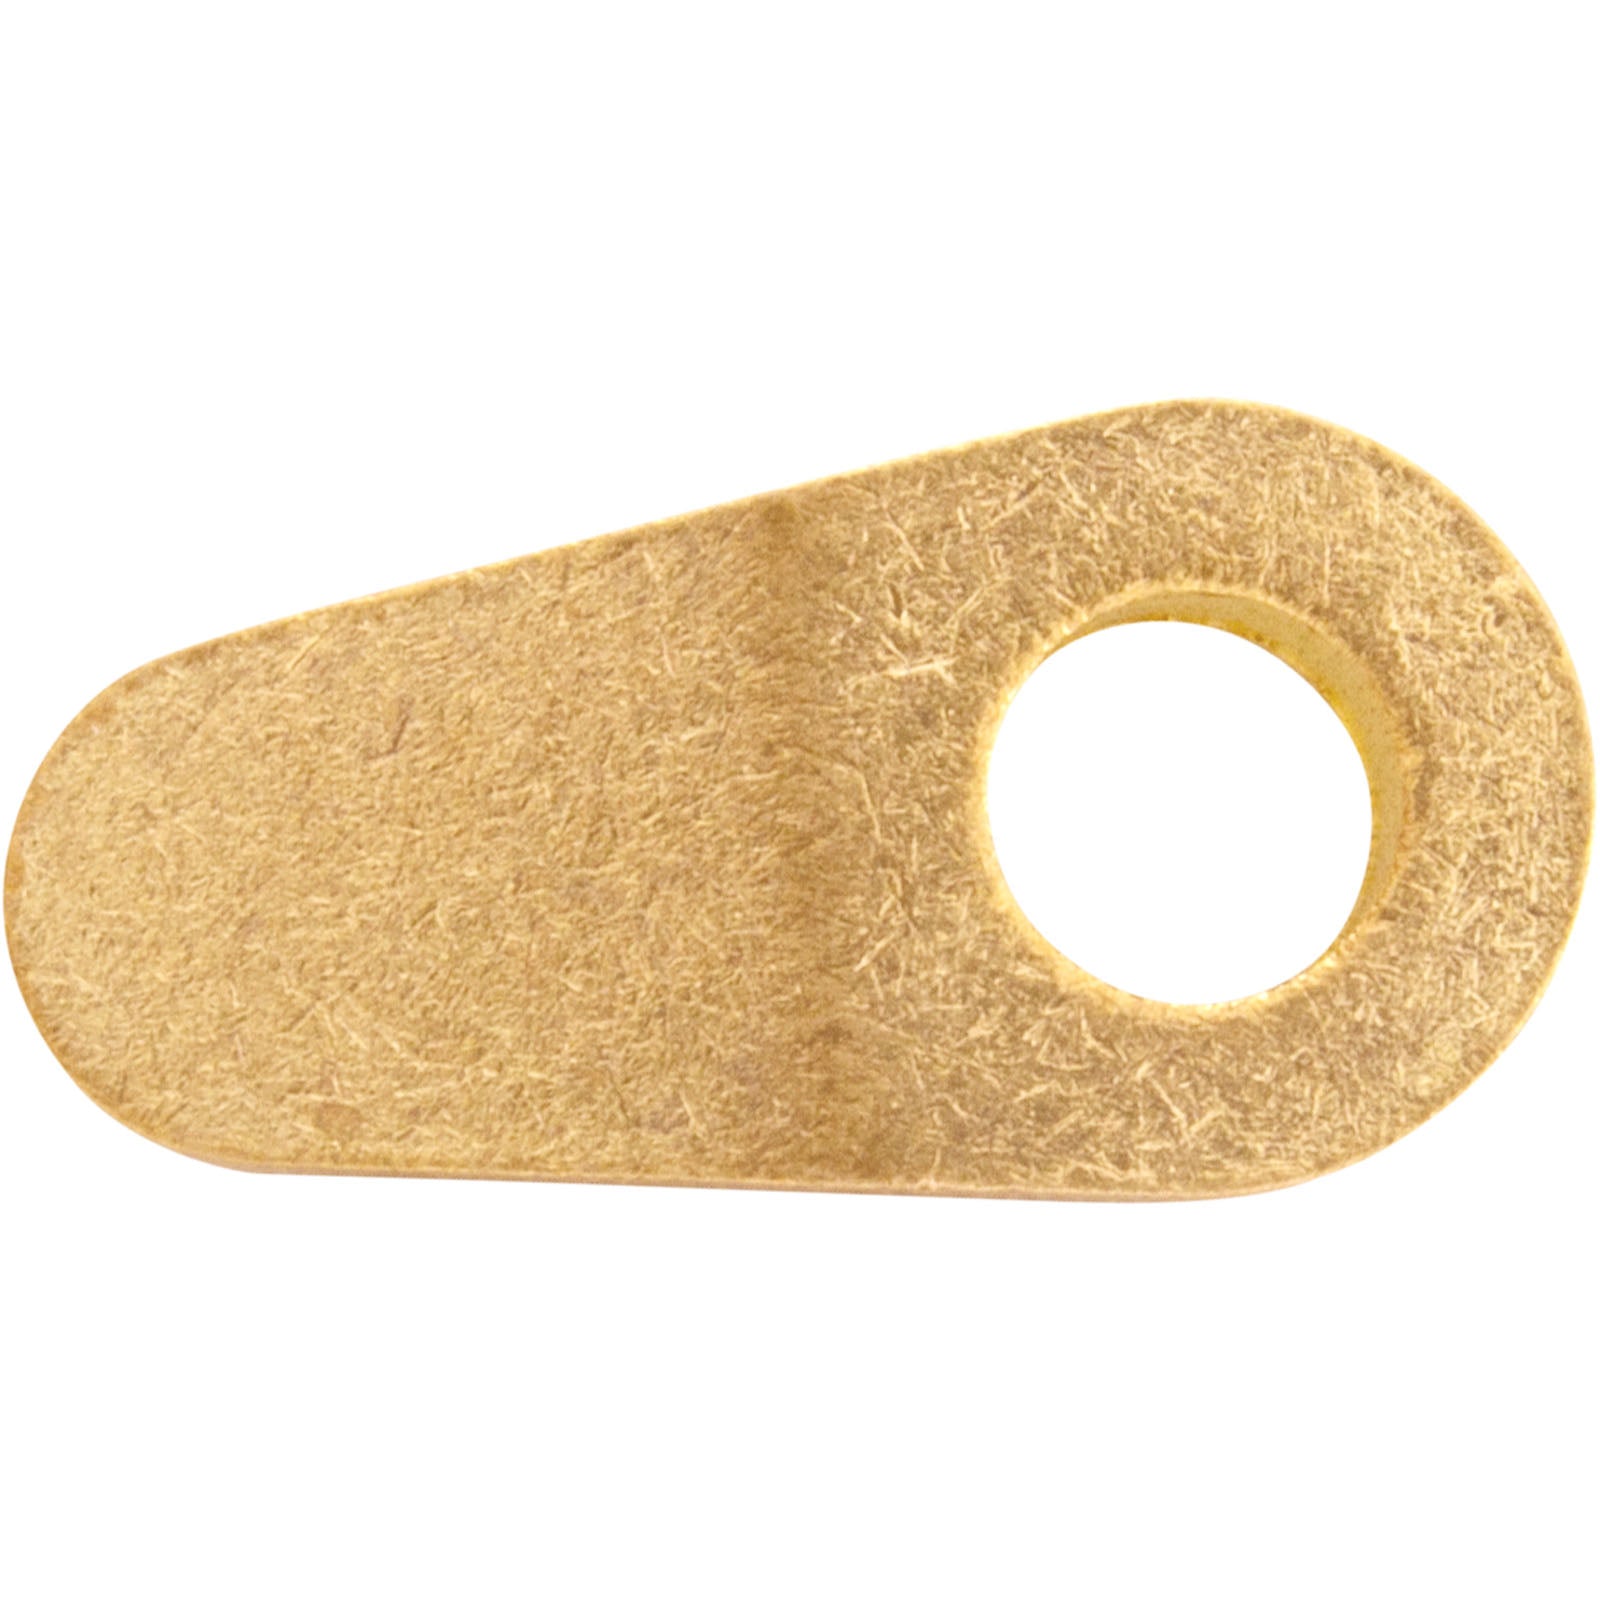 Light Retainer Clip, American Products, Amerlite, Brass 79105100